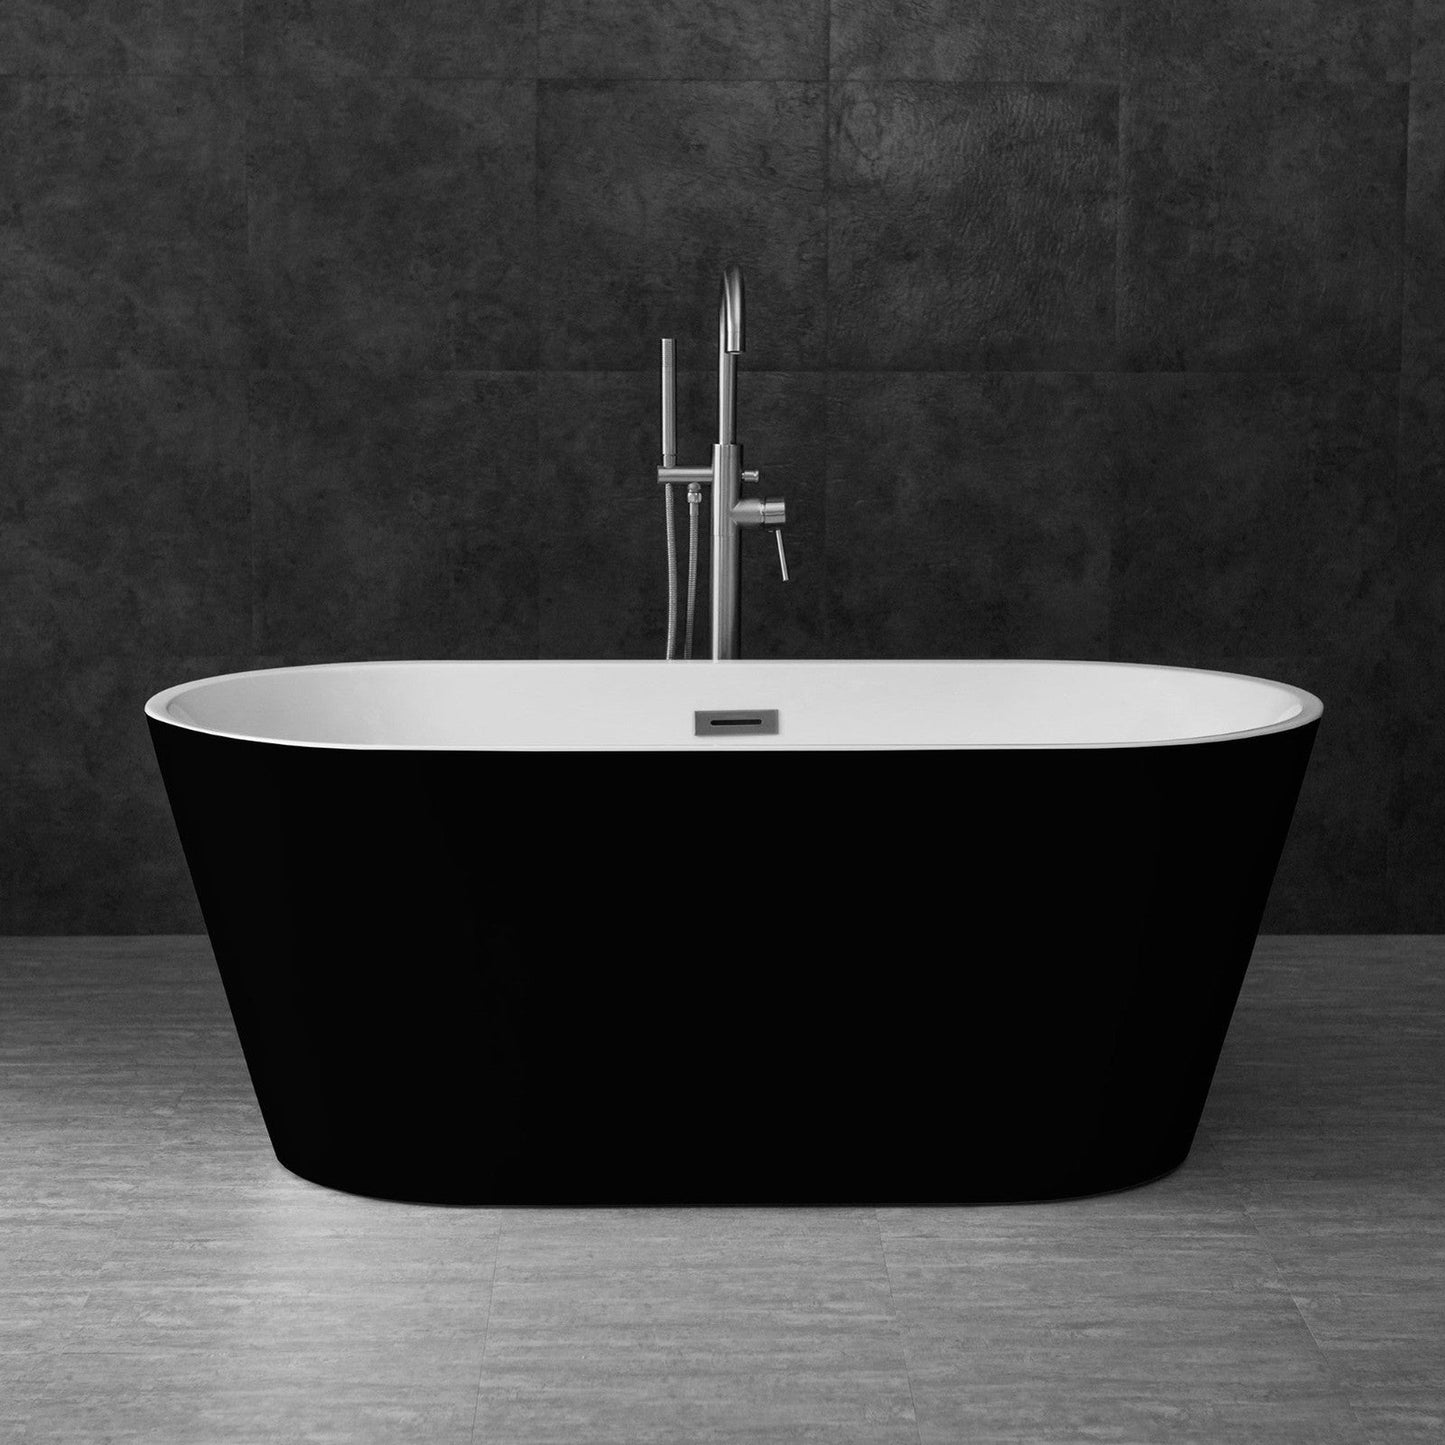 WoodBridge 59" Black Acrylic Freestanding Contemporary Soaking Bathtub With Brushed Nickel Drain, Overflow, F0070BNDR Tub Filler and Caddy Tray